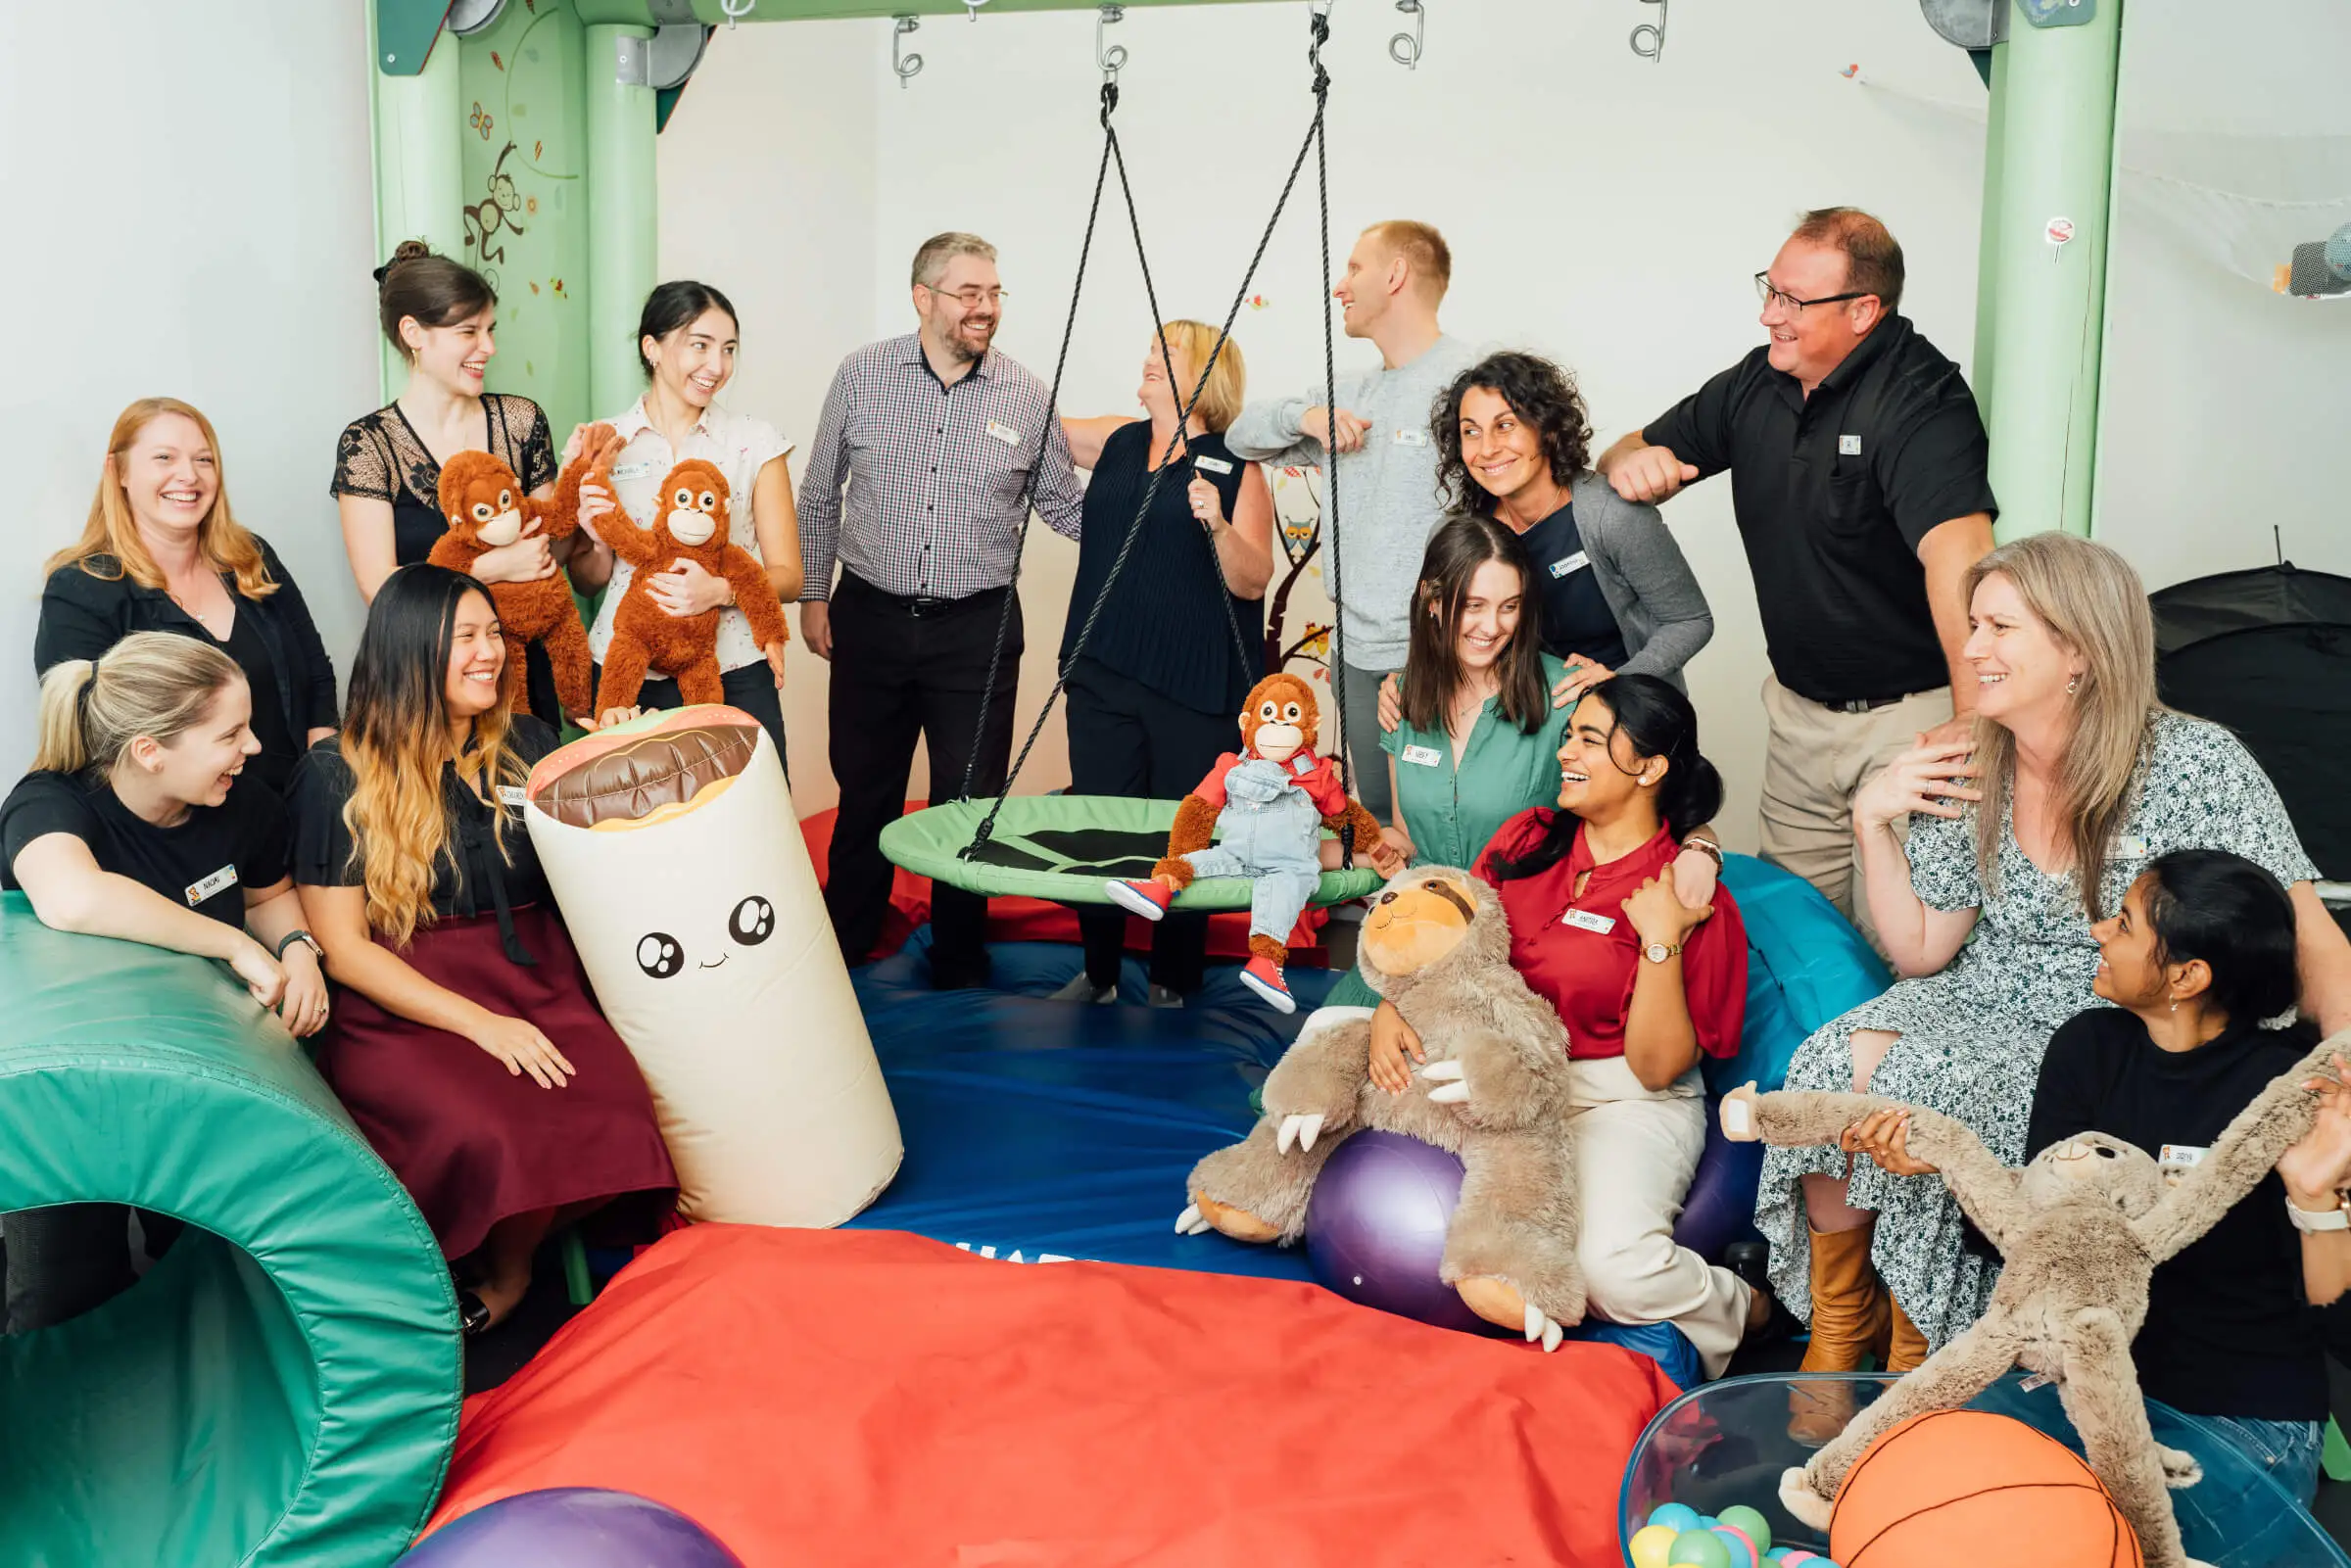 Pepper Kids Therapy team, mostly smiling, in a playroom setting with various toys and playground equipment. Some are holding stuffed animals and interacting in a casual, friendly manner.